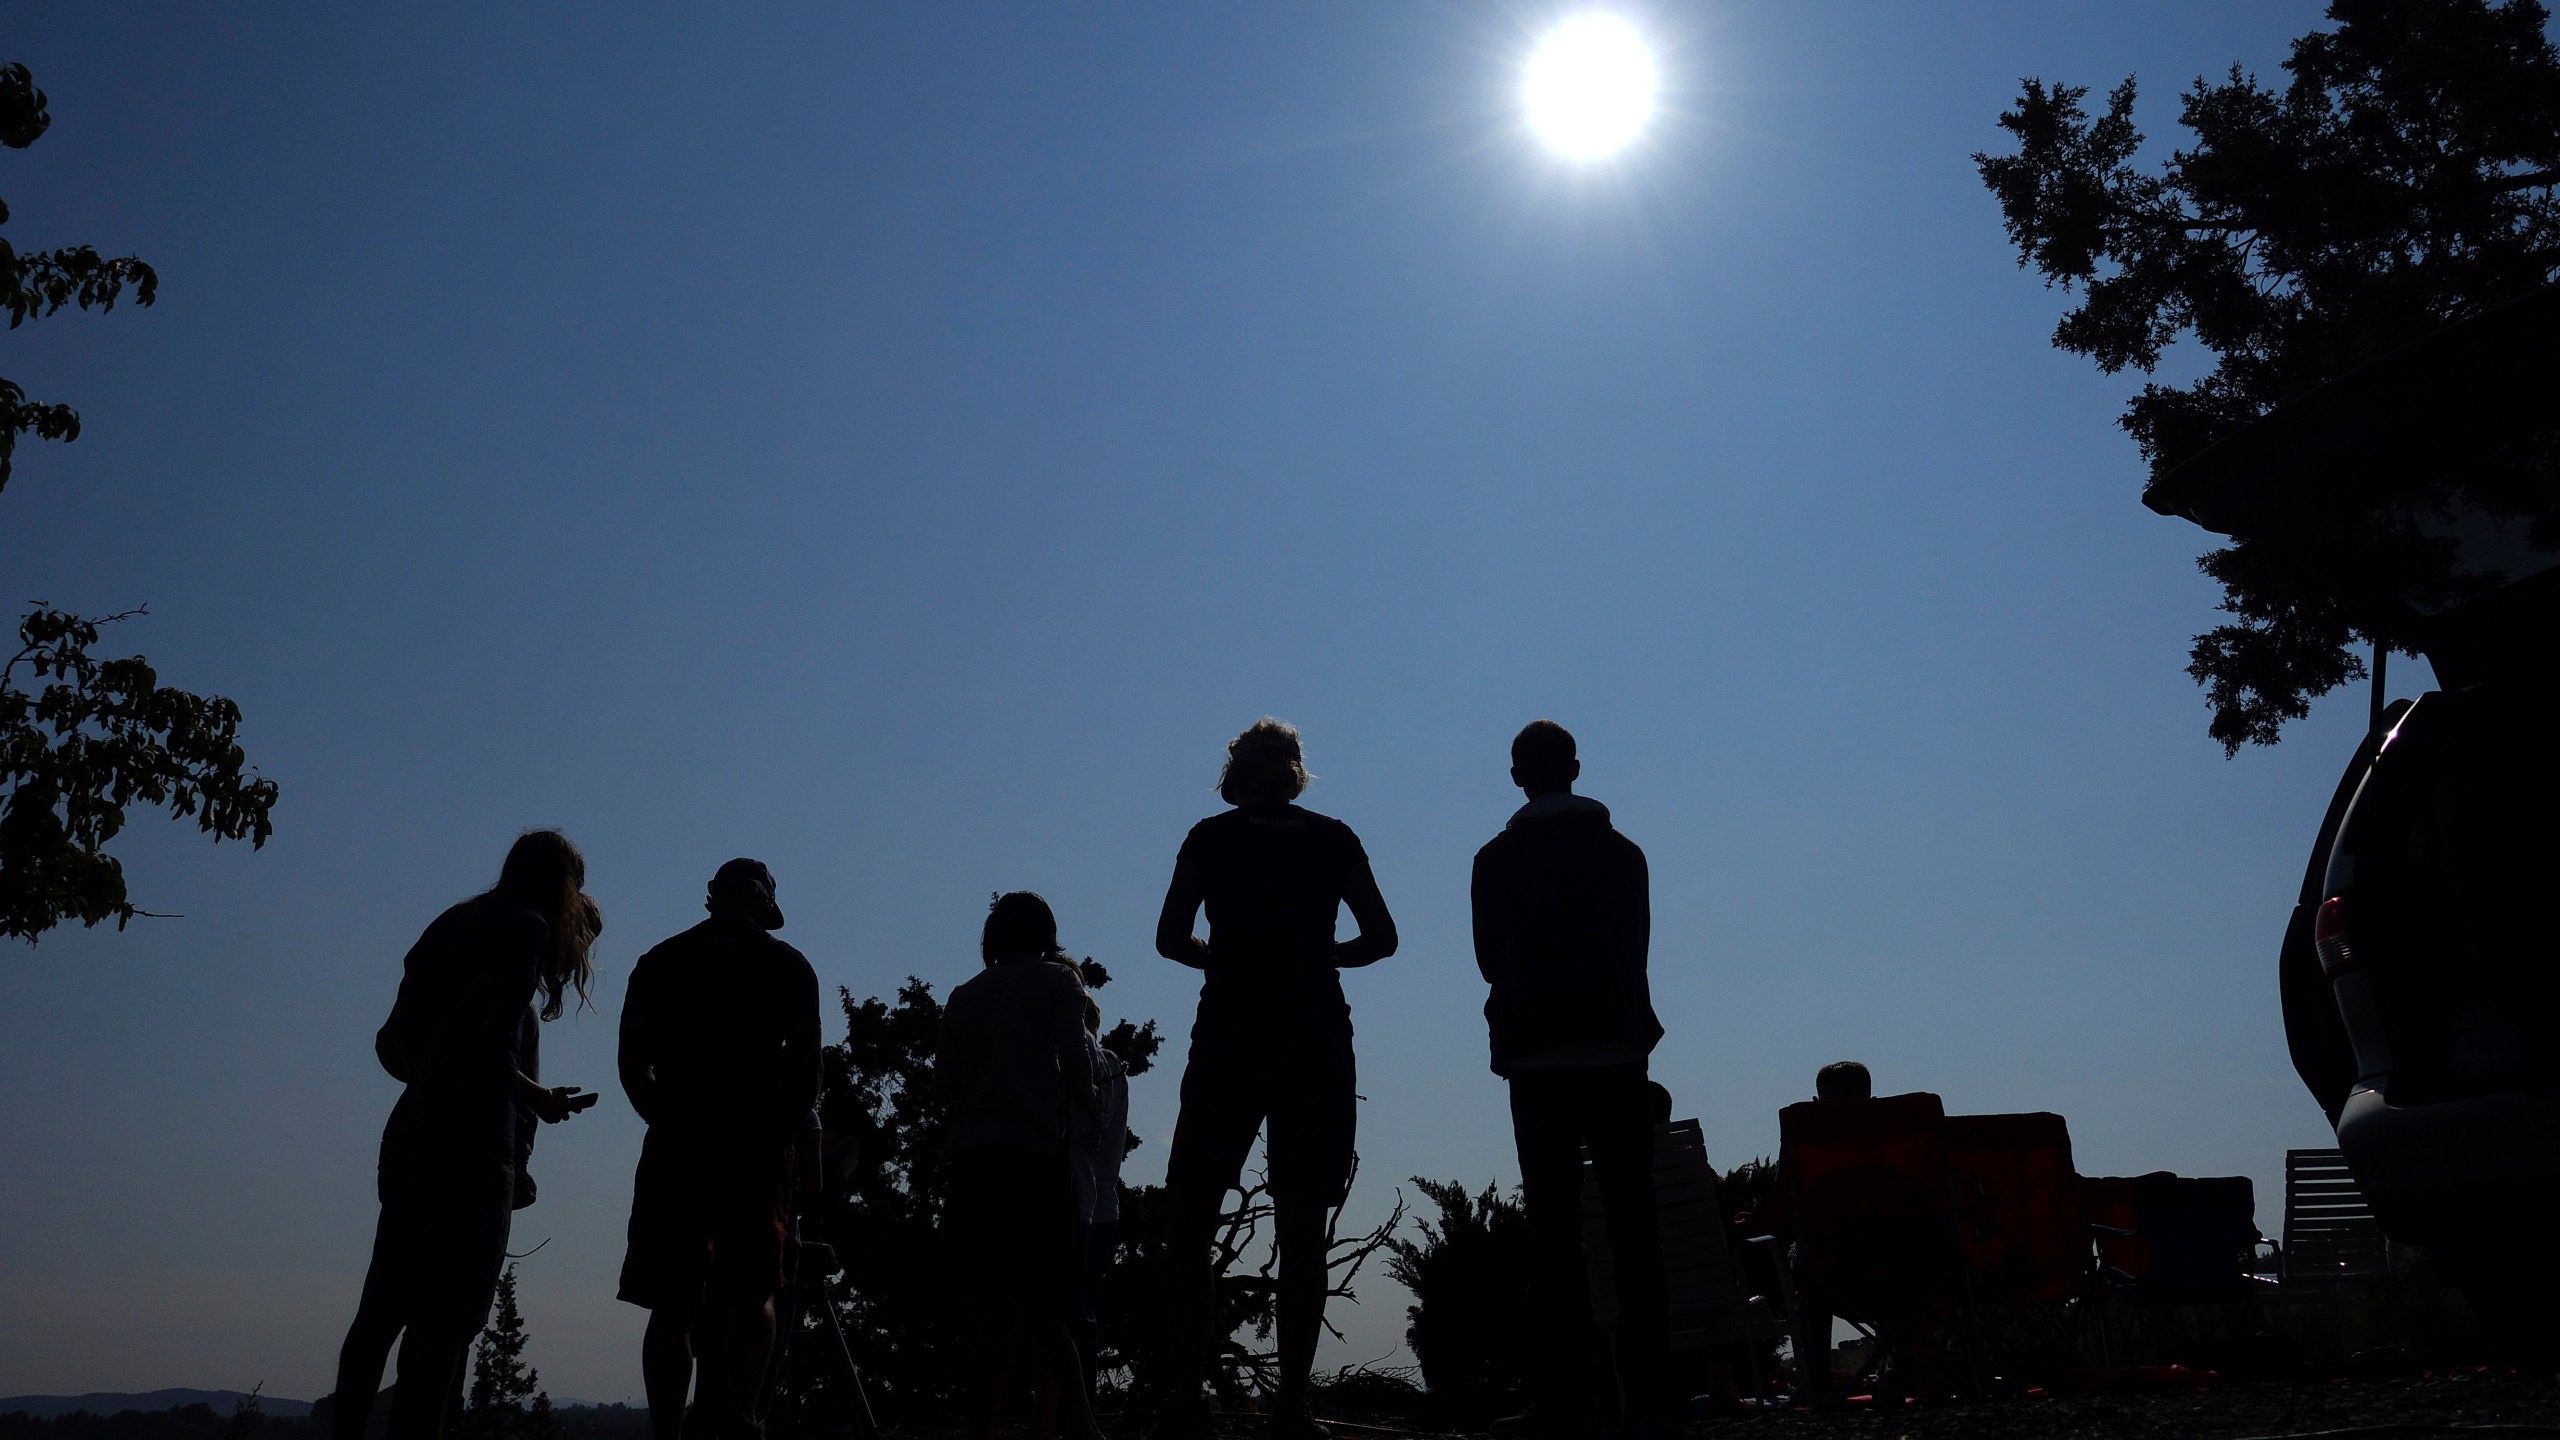 FILE - People gather near Redmond, Ore., to view the sun as it nears a total eclipse by the moon, Monday, Aug. 21, 2017. The April 8, 2024 total solar eclipse in North America first hits land at Mexico’s Pacific coast, cuts diagonally across the U.S. from Texas to Maine and exits in eastern Canada. (AP Photo/Ted S. Warren, File)